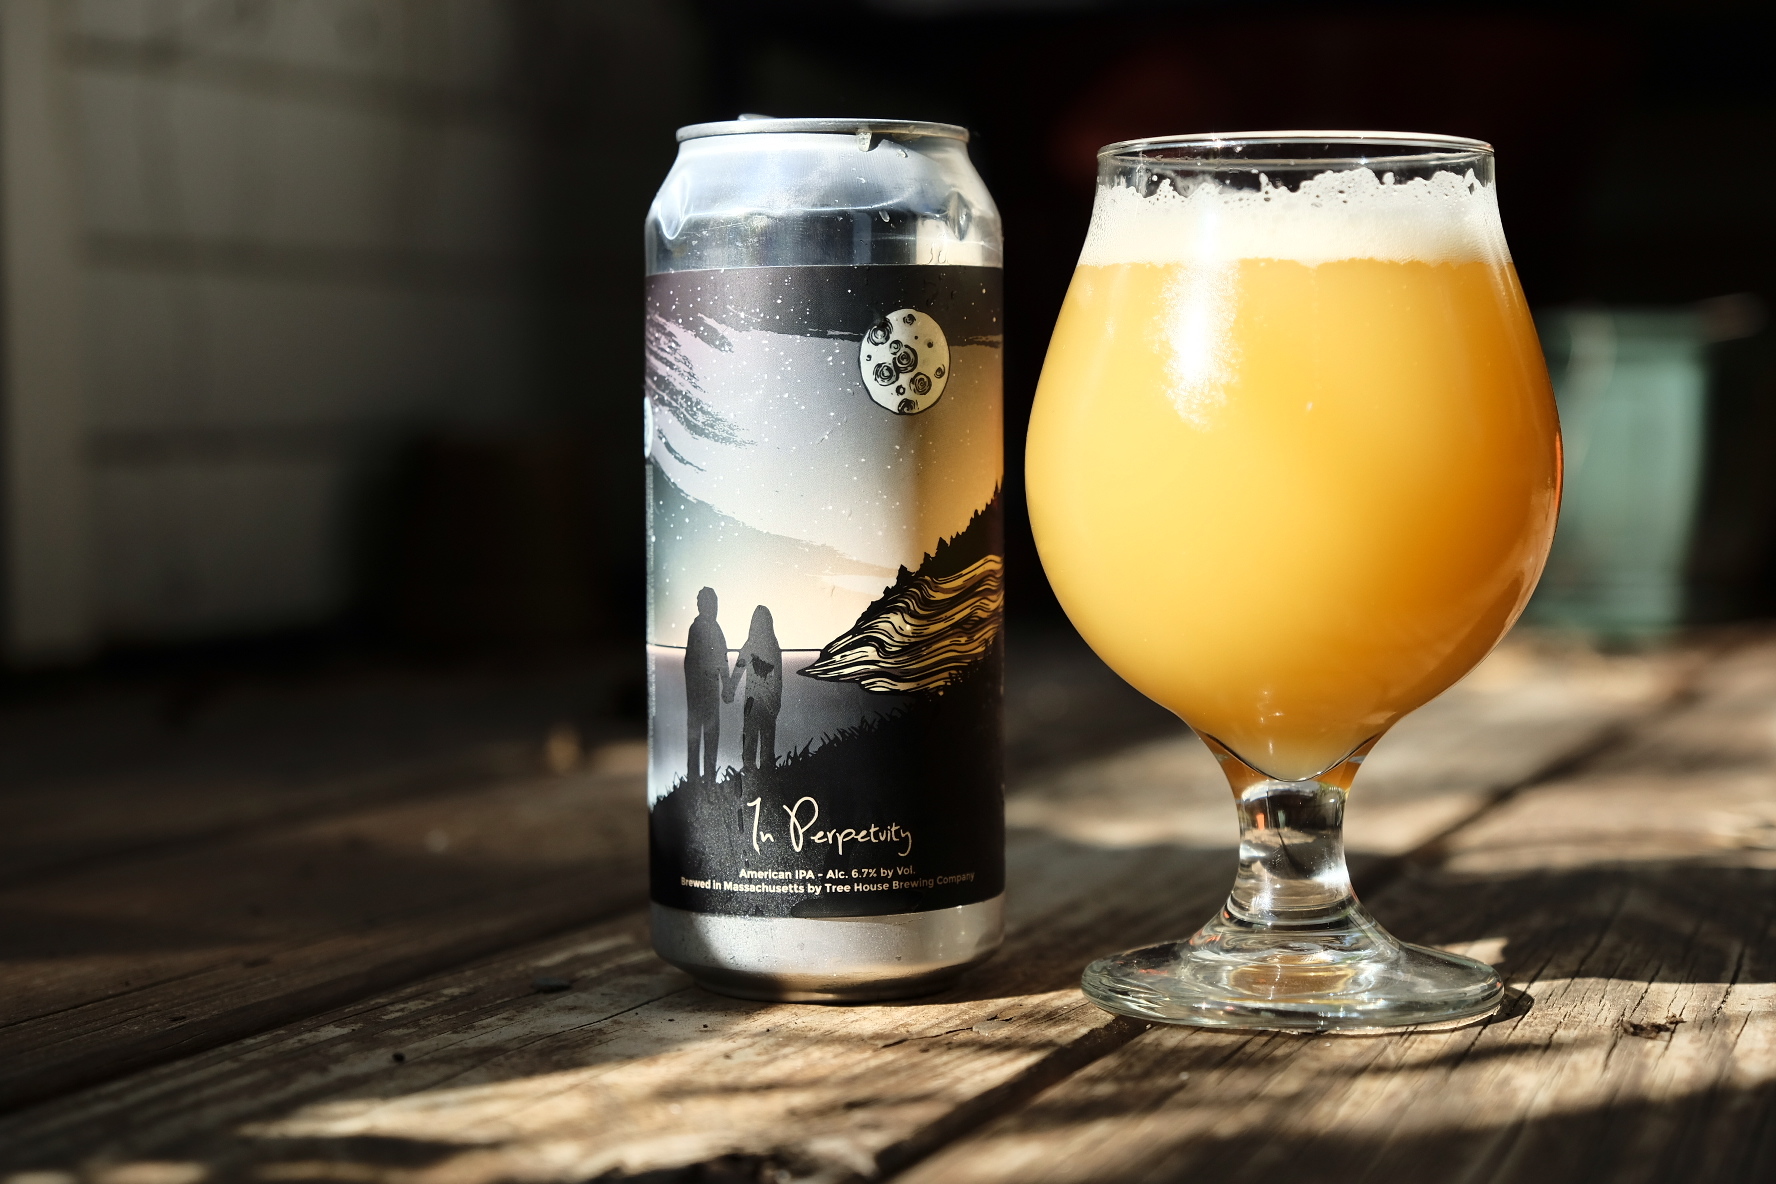 Tree House Brewing Company's In Perpetuity